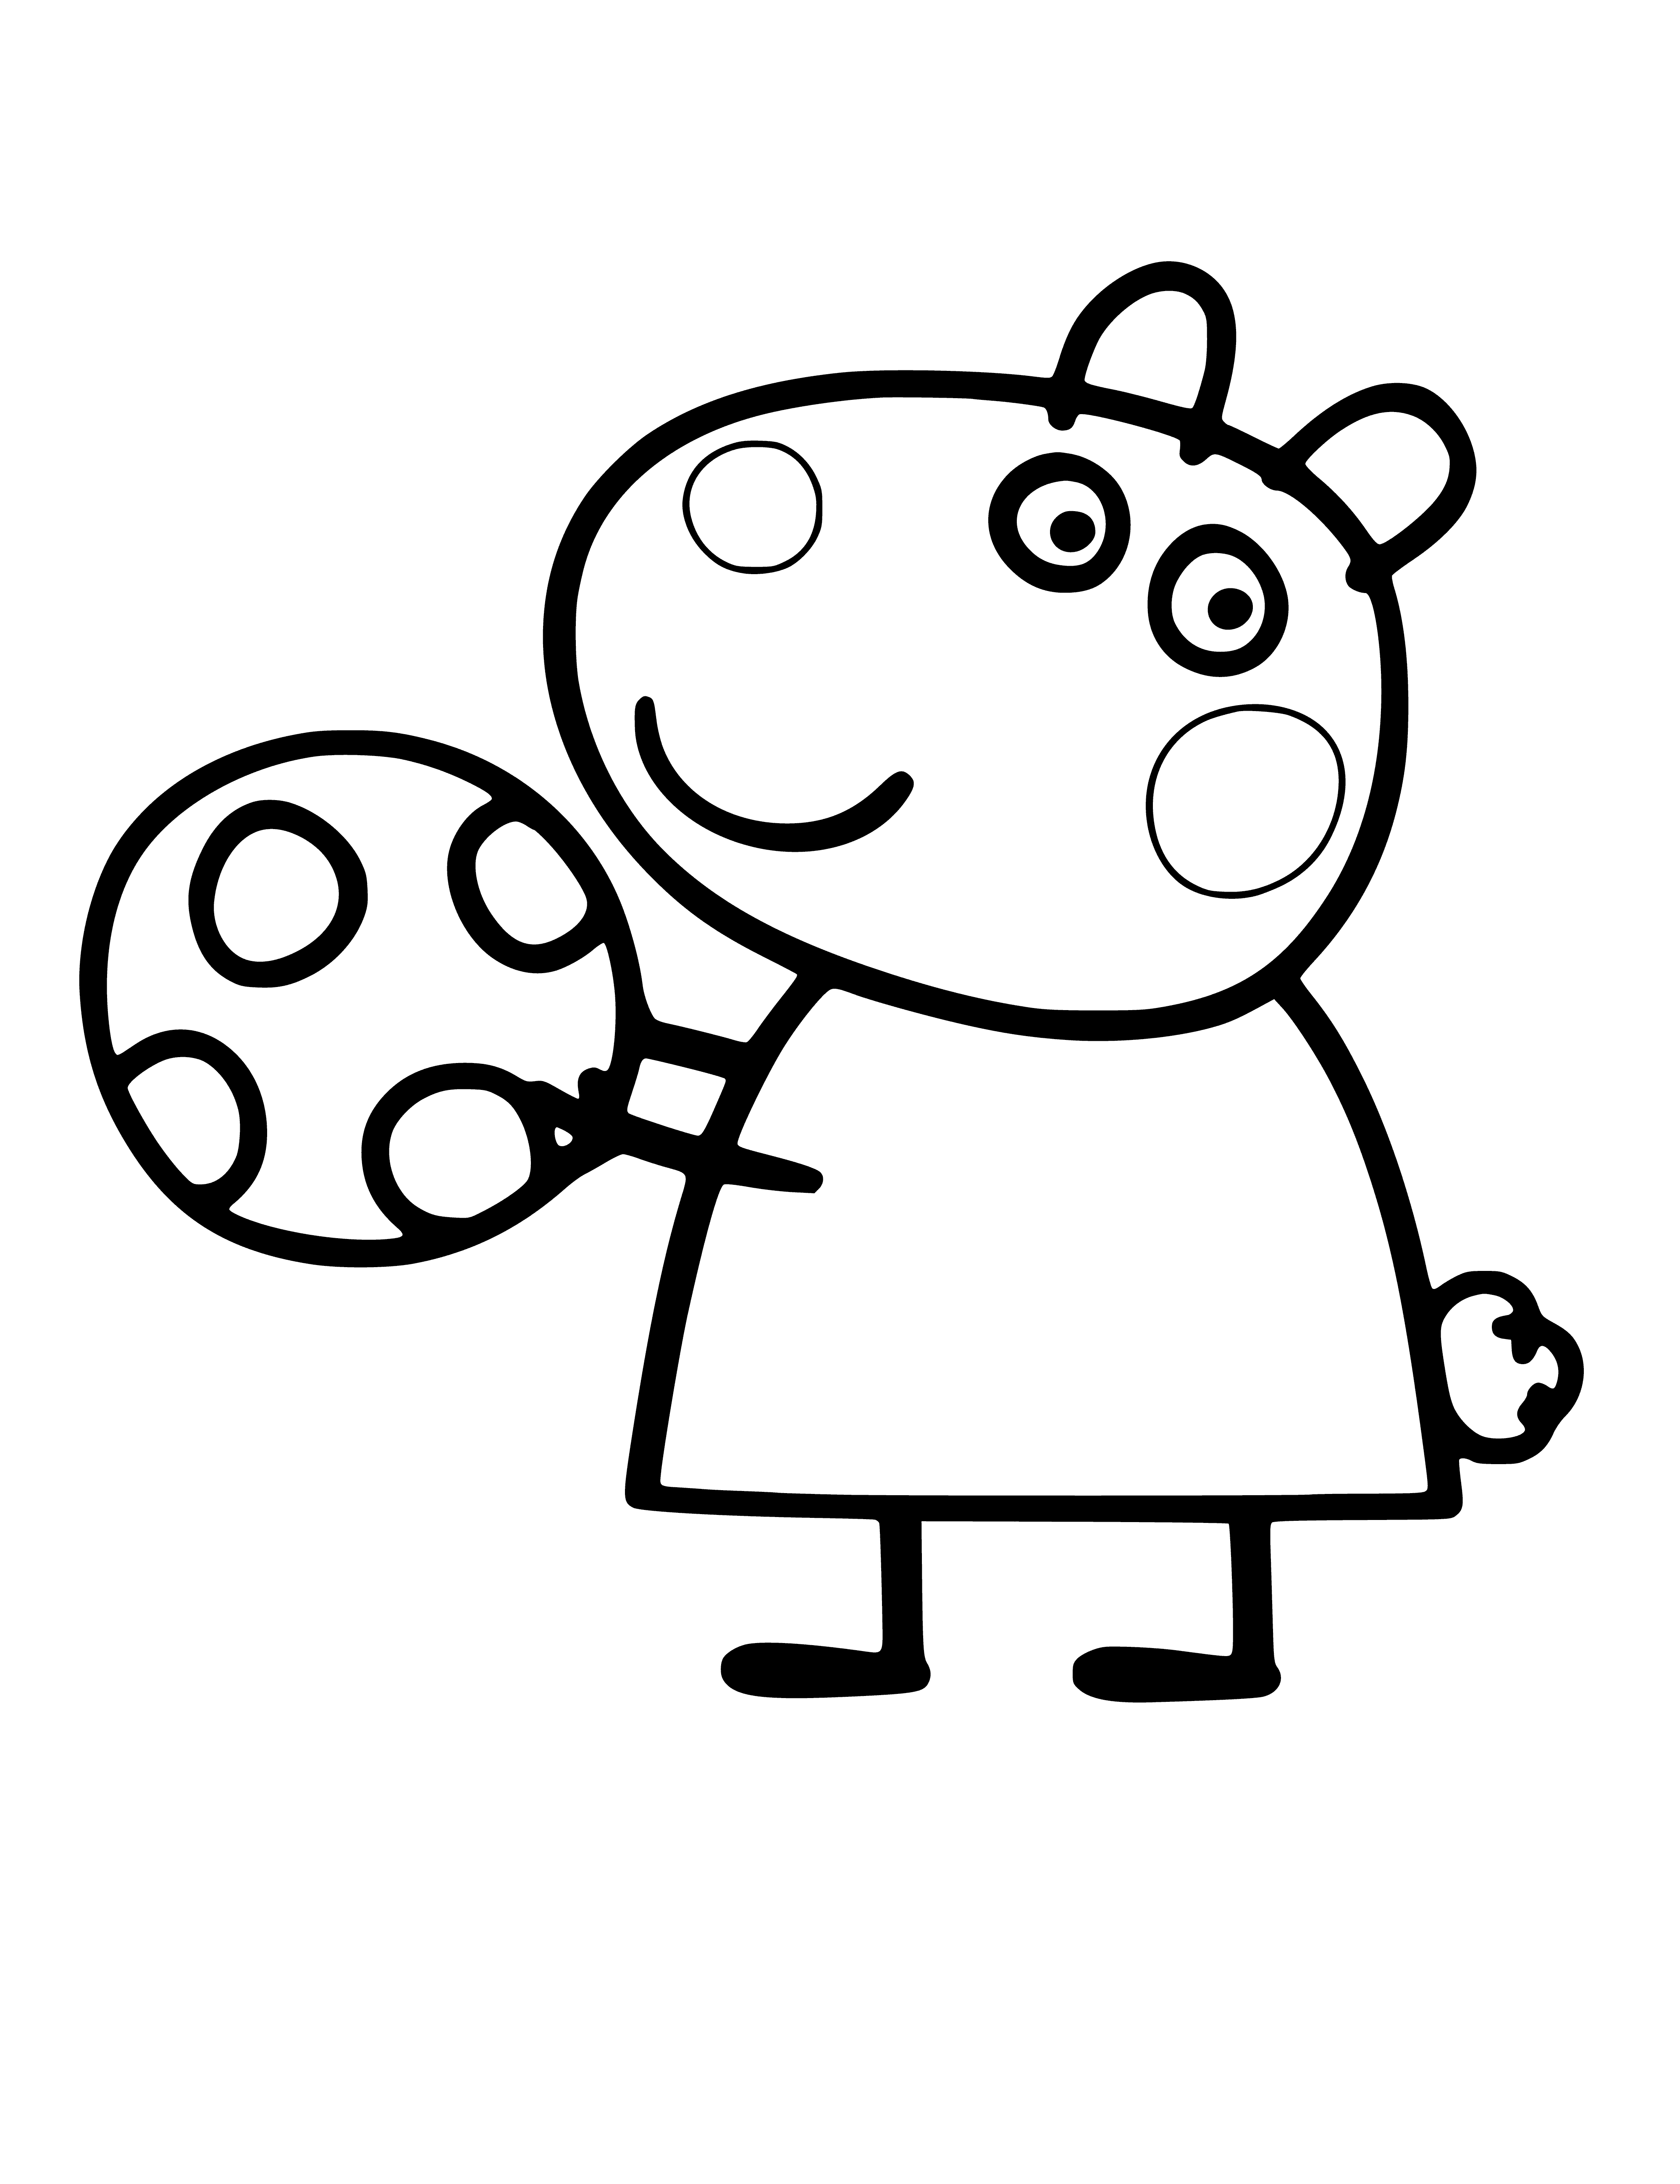 coloring page: Suzie the Sheep is smiling on a green ball in her pink dress, white collar & tilted head.